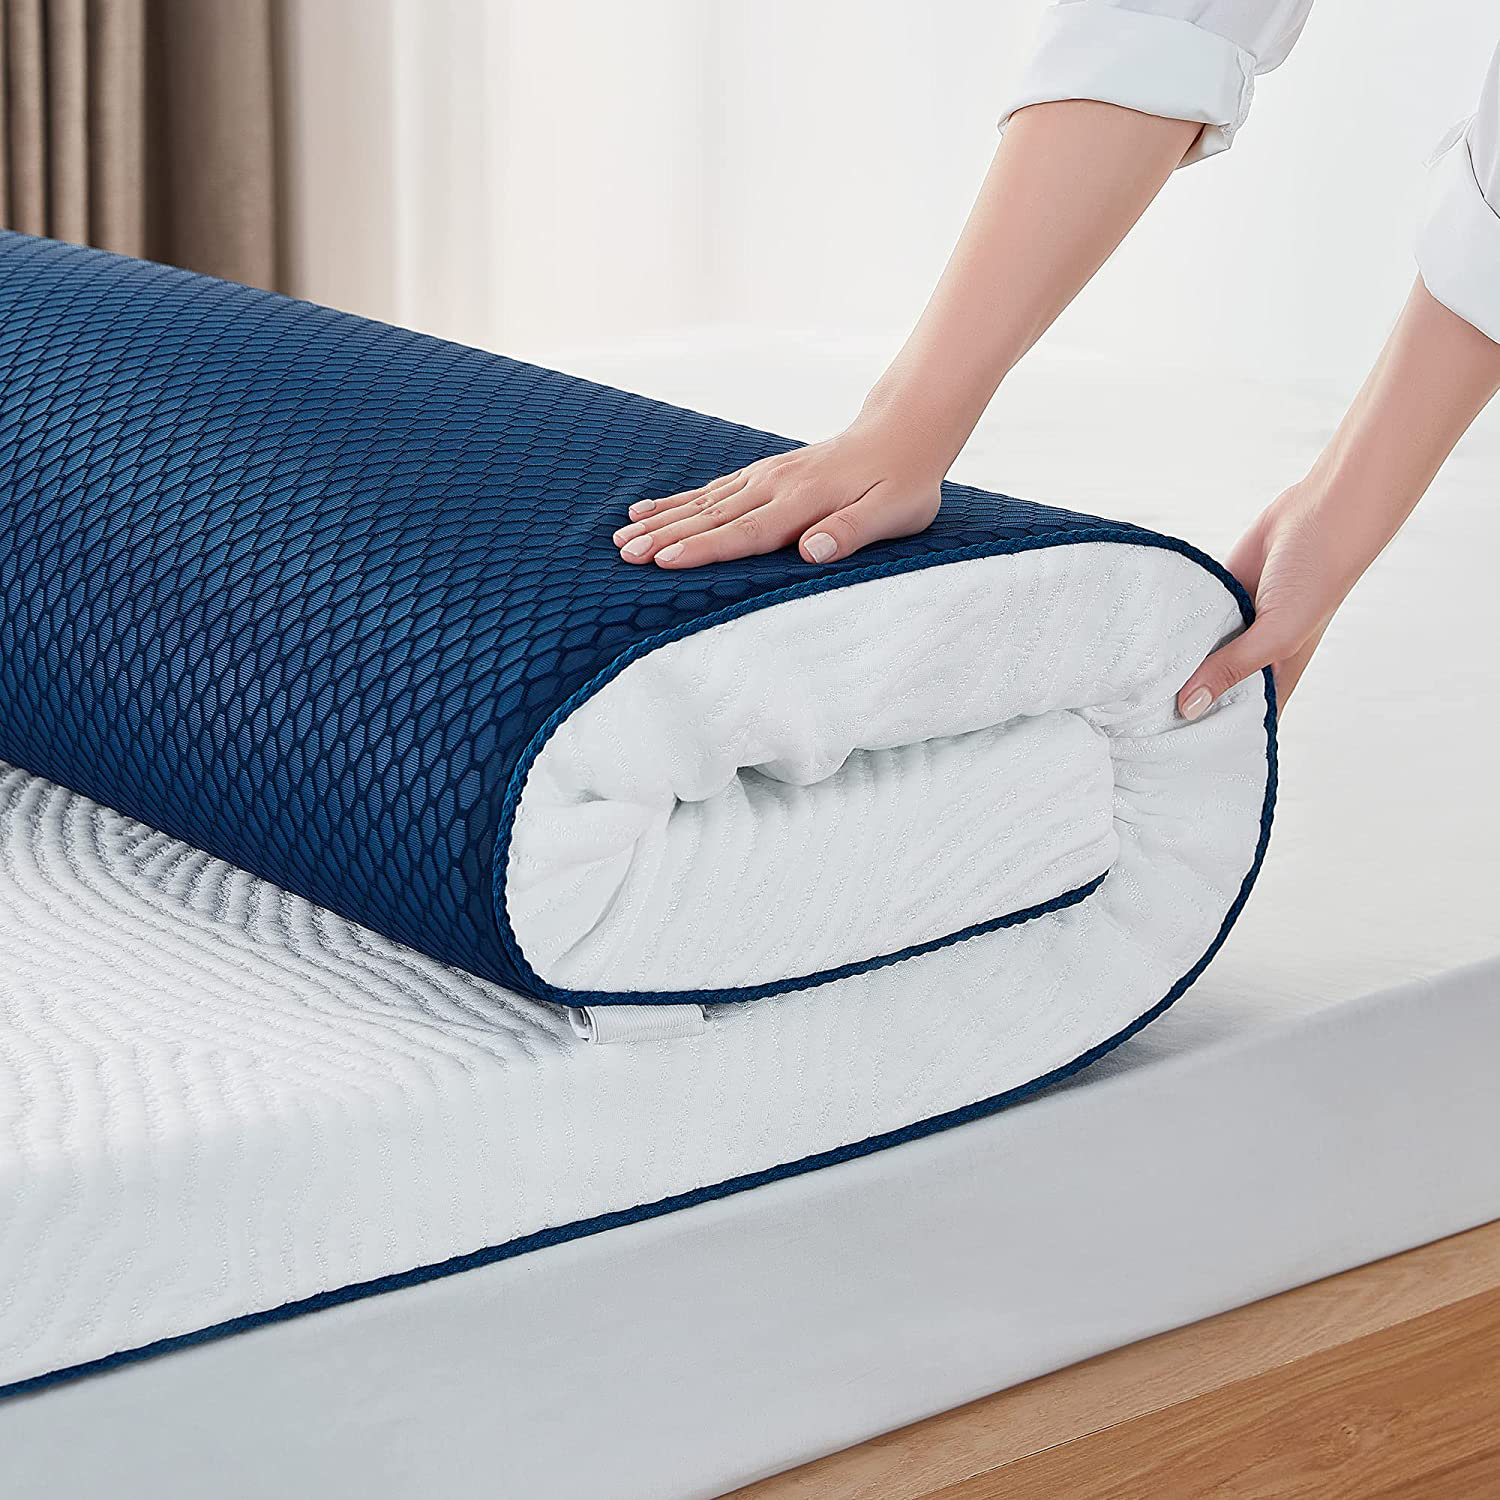 Topper 3 inch, Foam Mattress Topper Arsuite Bed Size: King